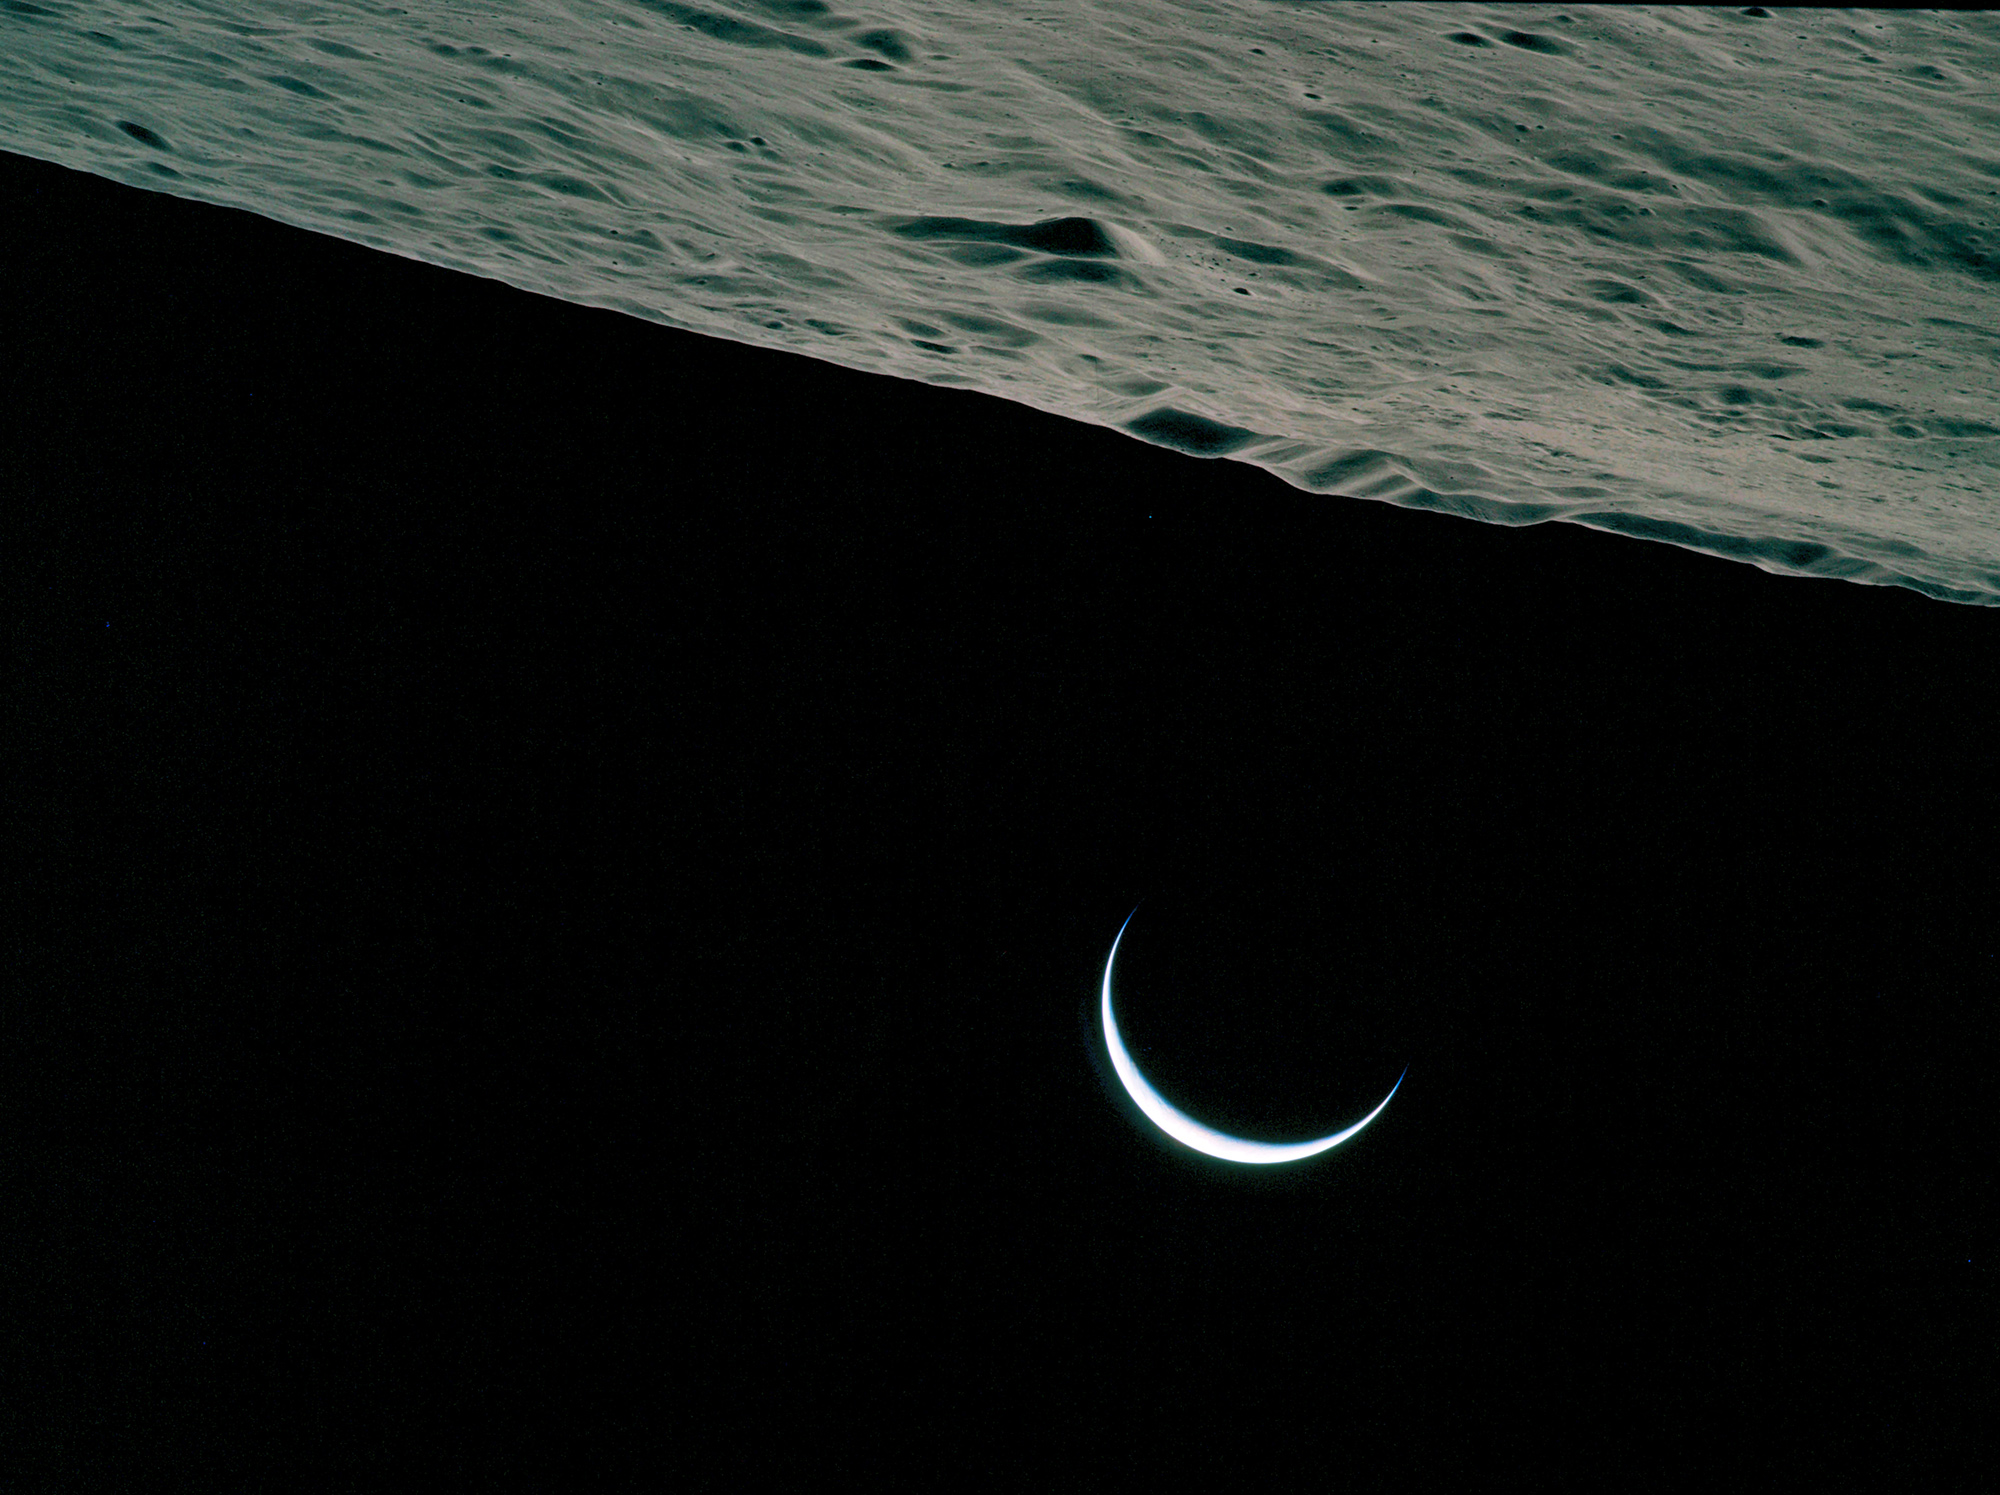 crescent-earth-as-seen-by-apollo-15-astronauts.jpg